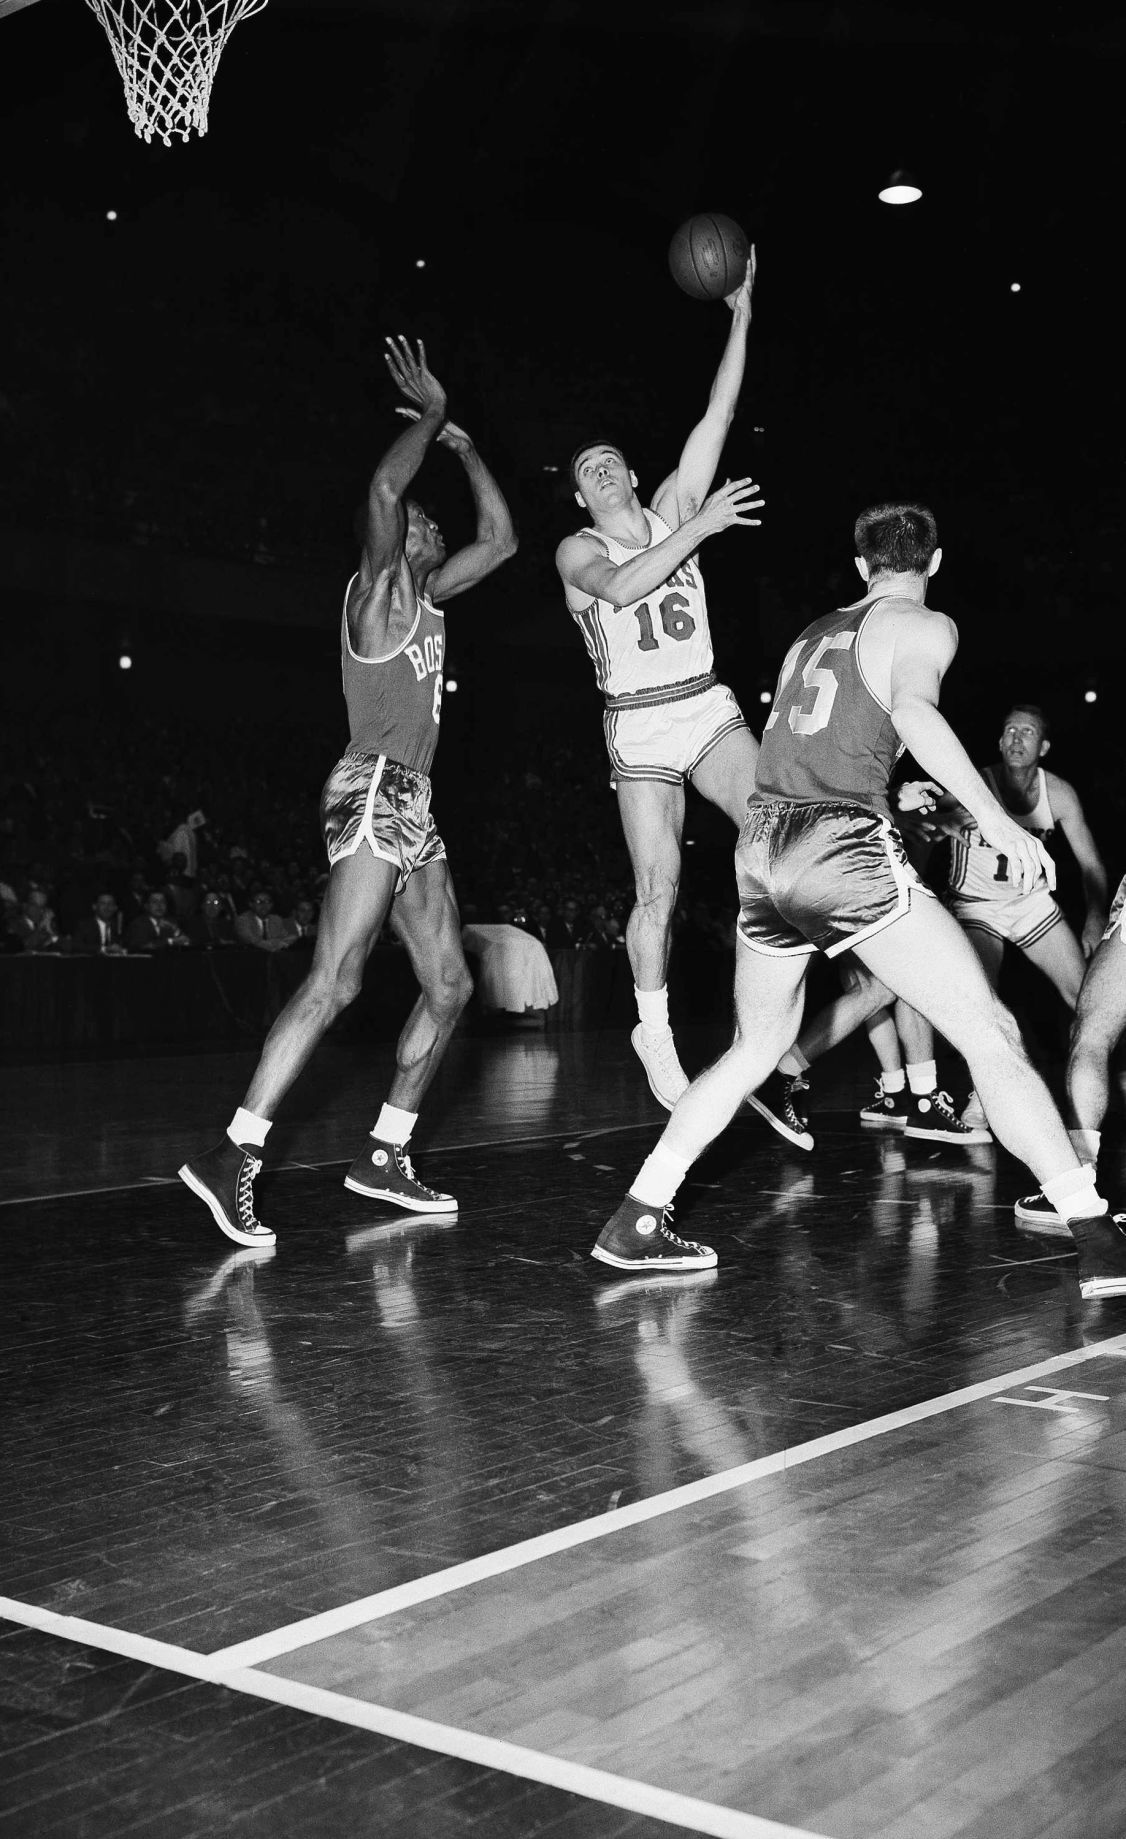 Gameday Throwback - St. Louis Hawks Beat The Celtics In 1958 NBA Finals